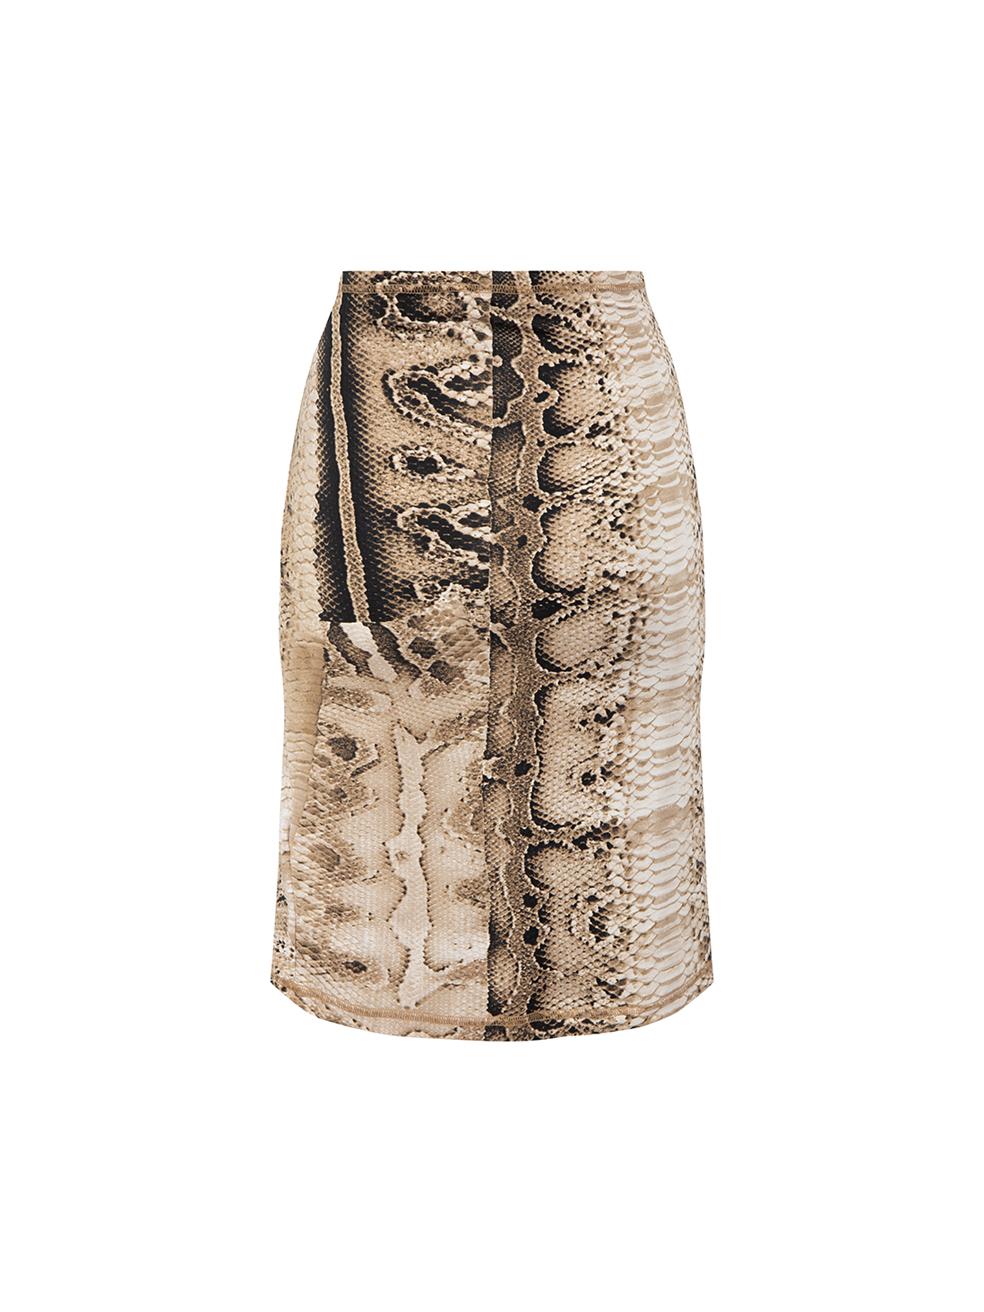 Roberto Cavalli Just Cavalli Brown Snake Print Skirt Size M In Good Condition For Sale In London, GB